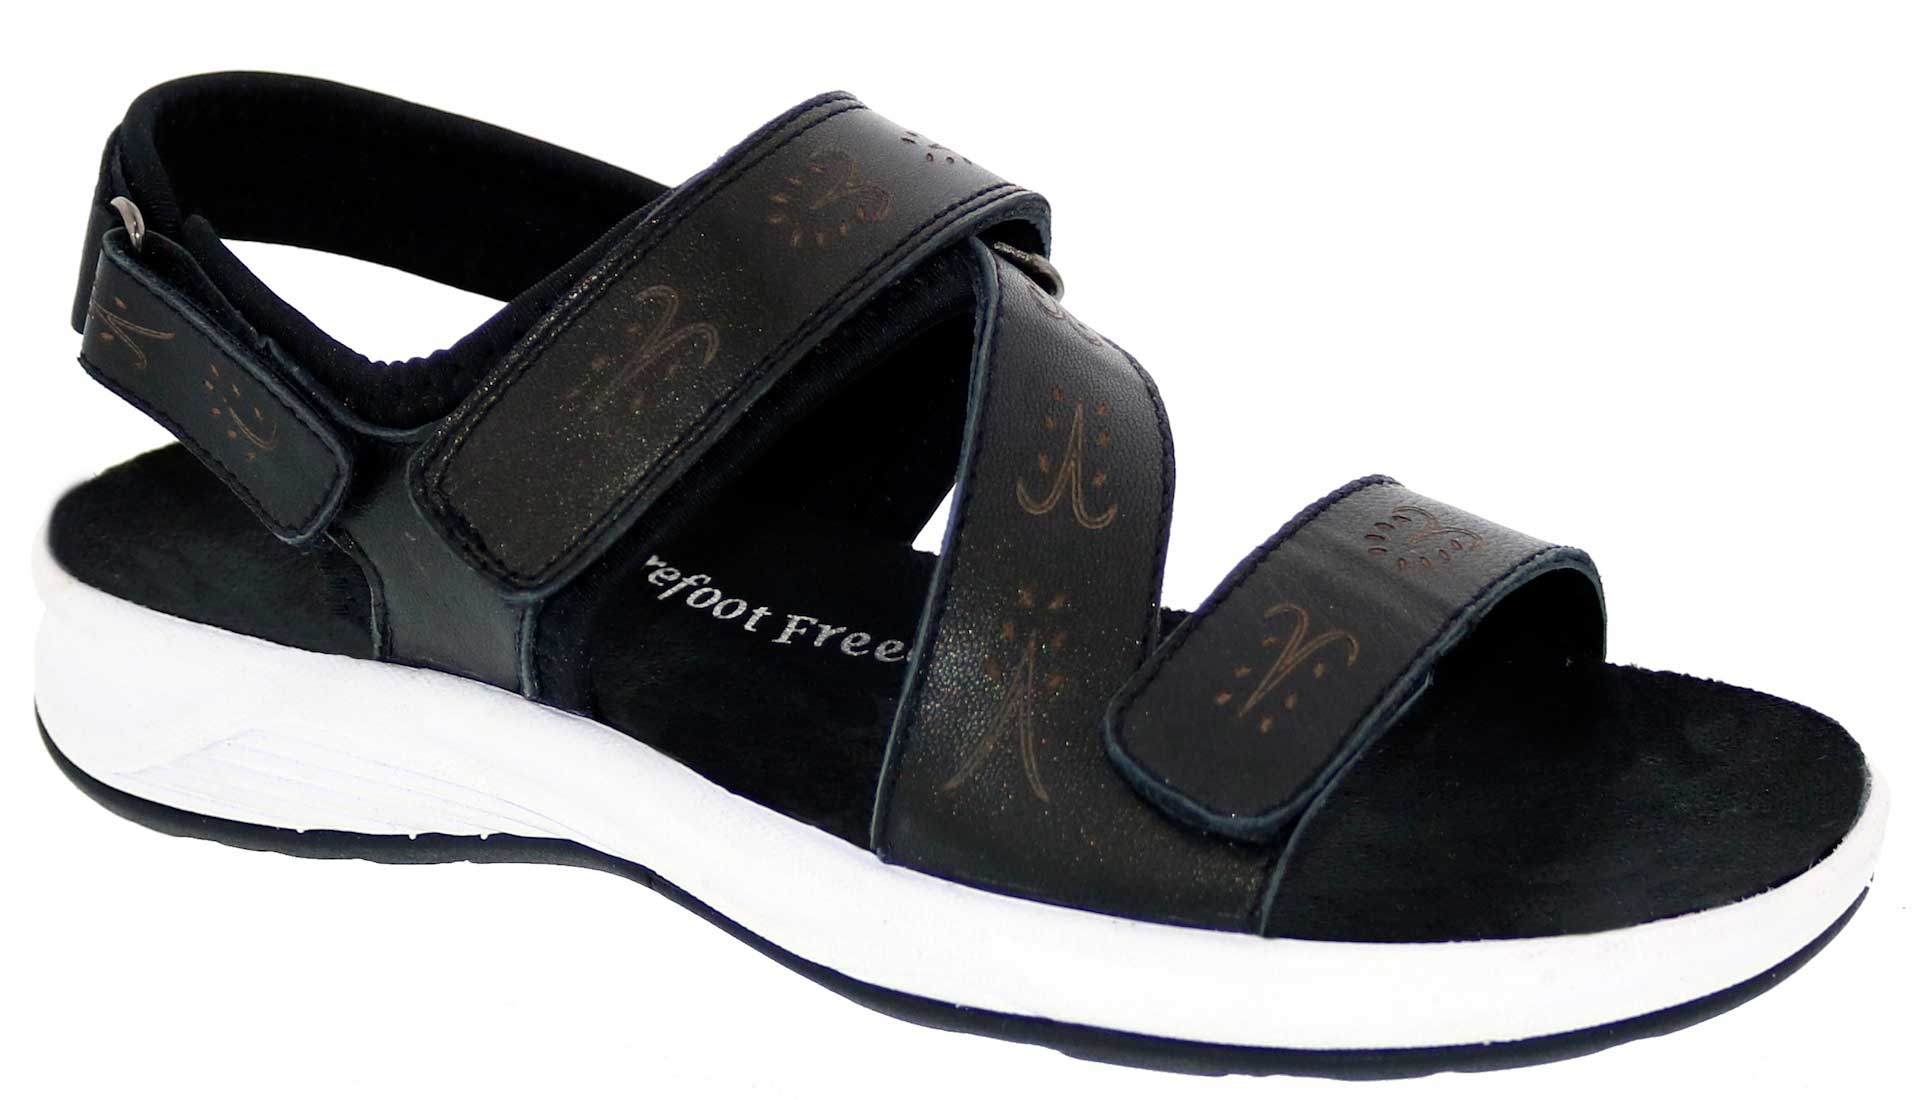 Drew Shoes Olympia 17780 - Women's Casual Comfort Therapeutic Sandal - Removable Footbeds